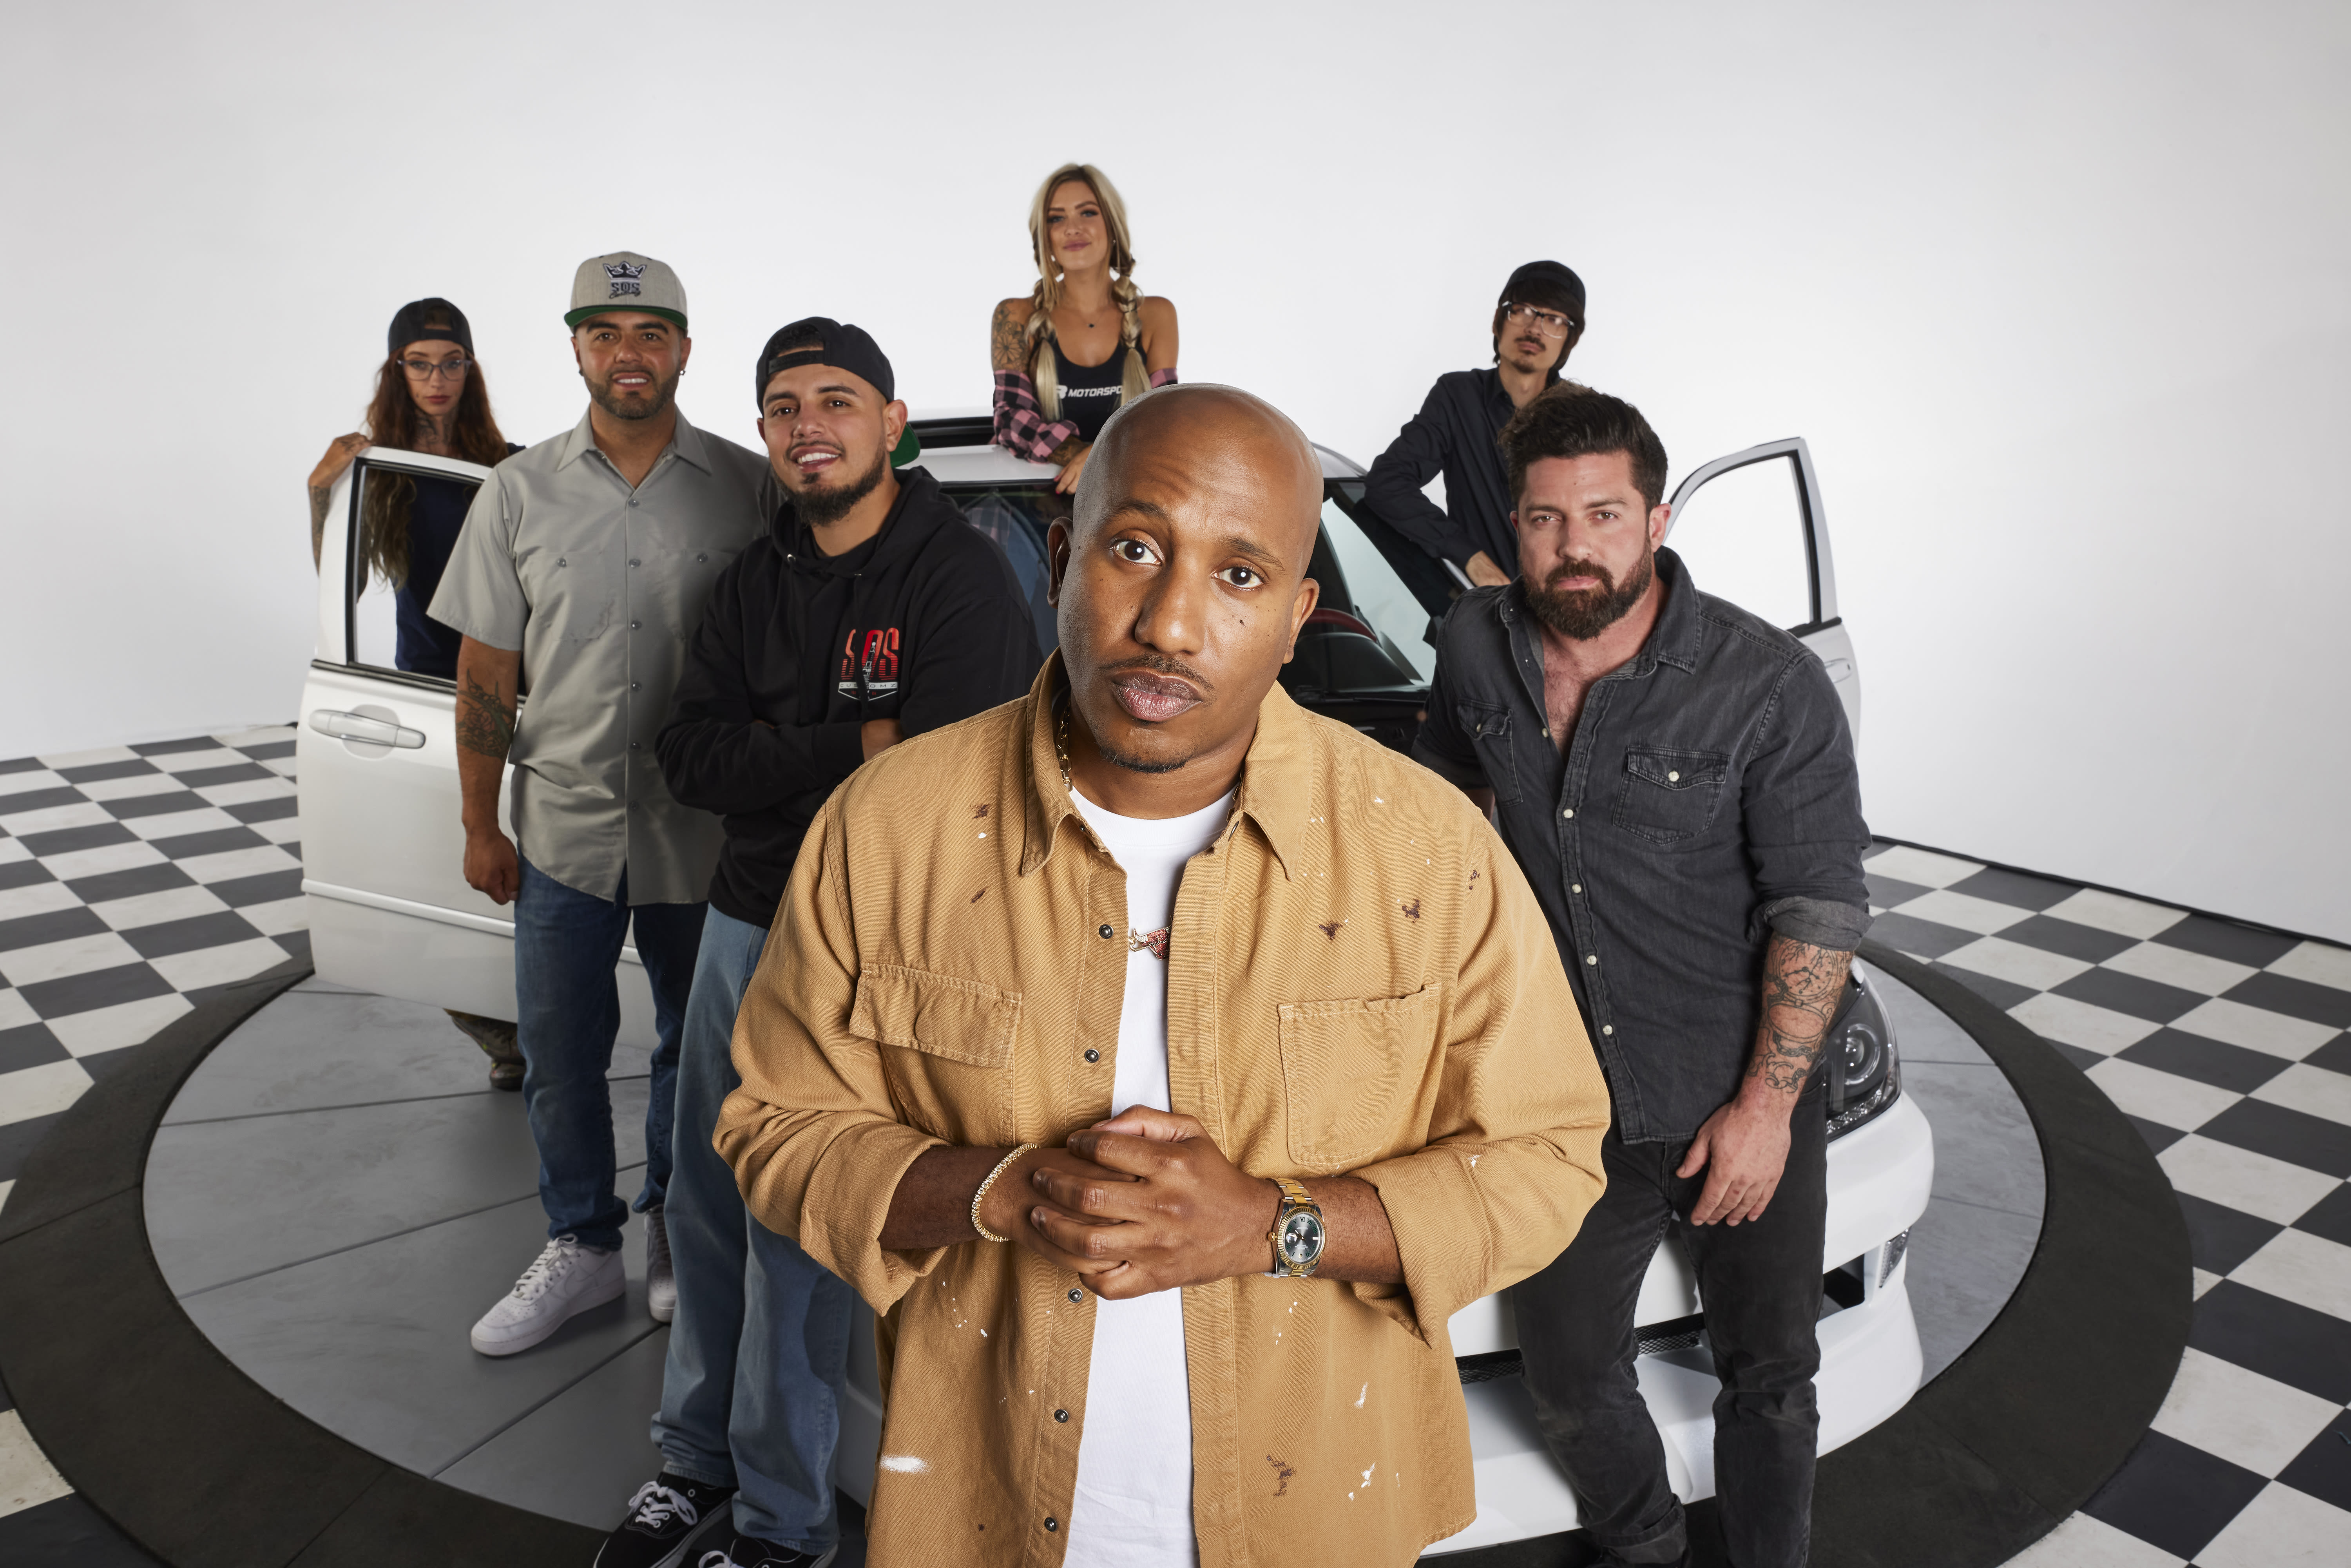 ‘Pimp My Ride’ Team Launching Netflix Series ‘Resurrected Rides’ With Chris Redd as Host (EXCLUSIVE)